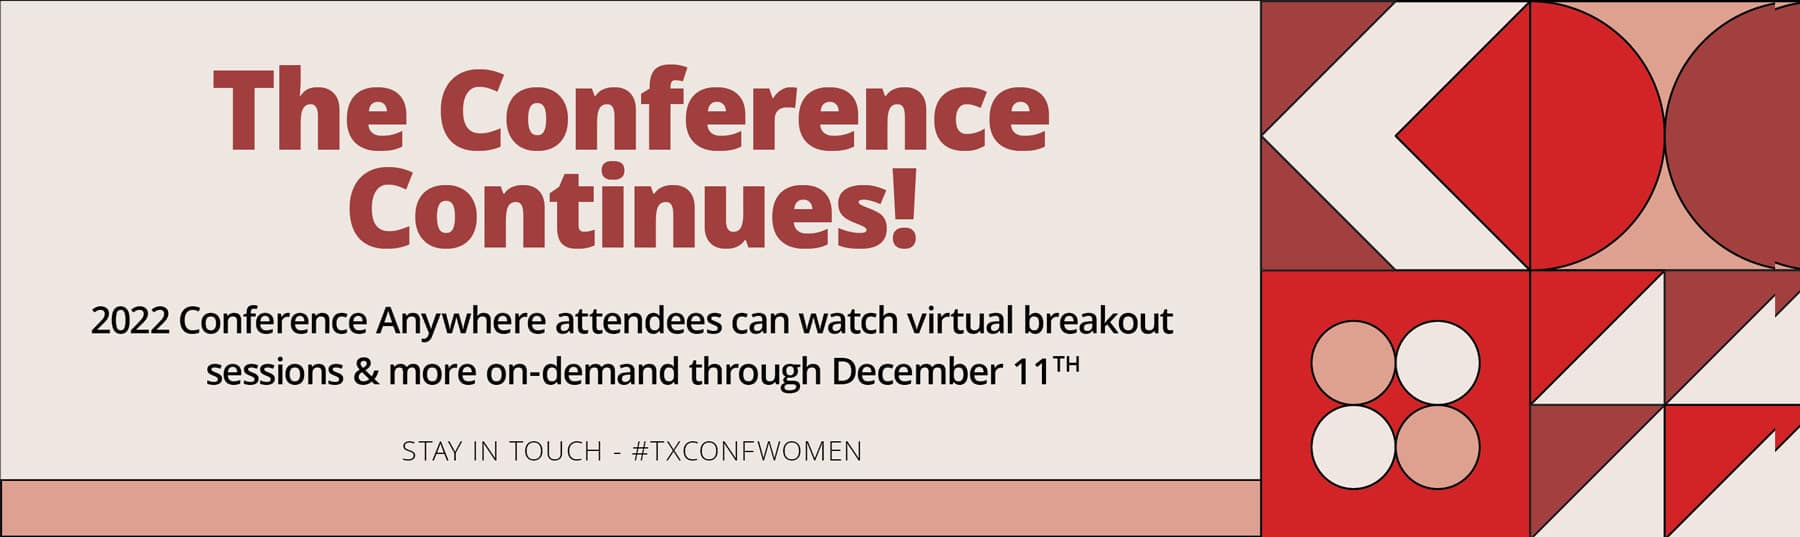 The Conference Continues! Watch virtual breakout sessions and more on demand through December 11th!